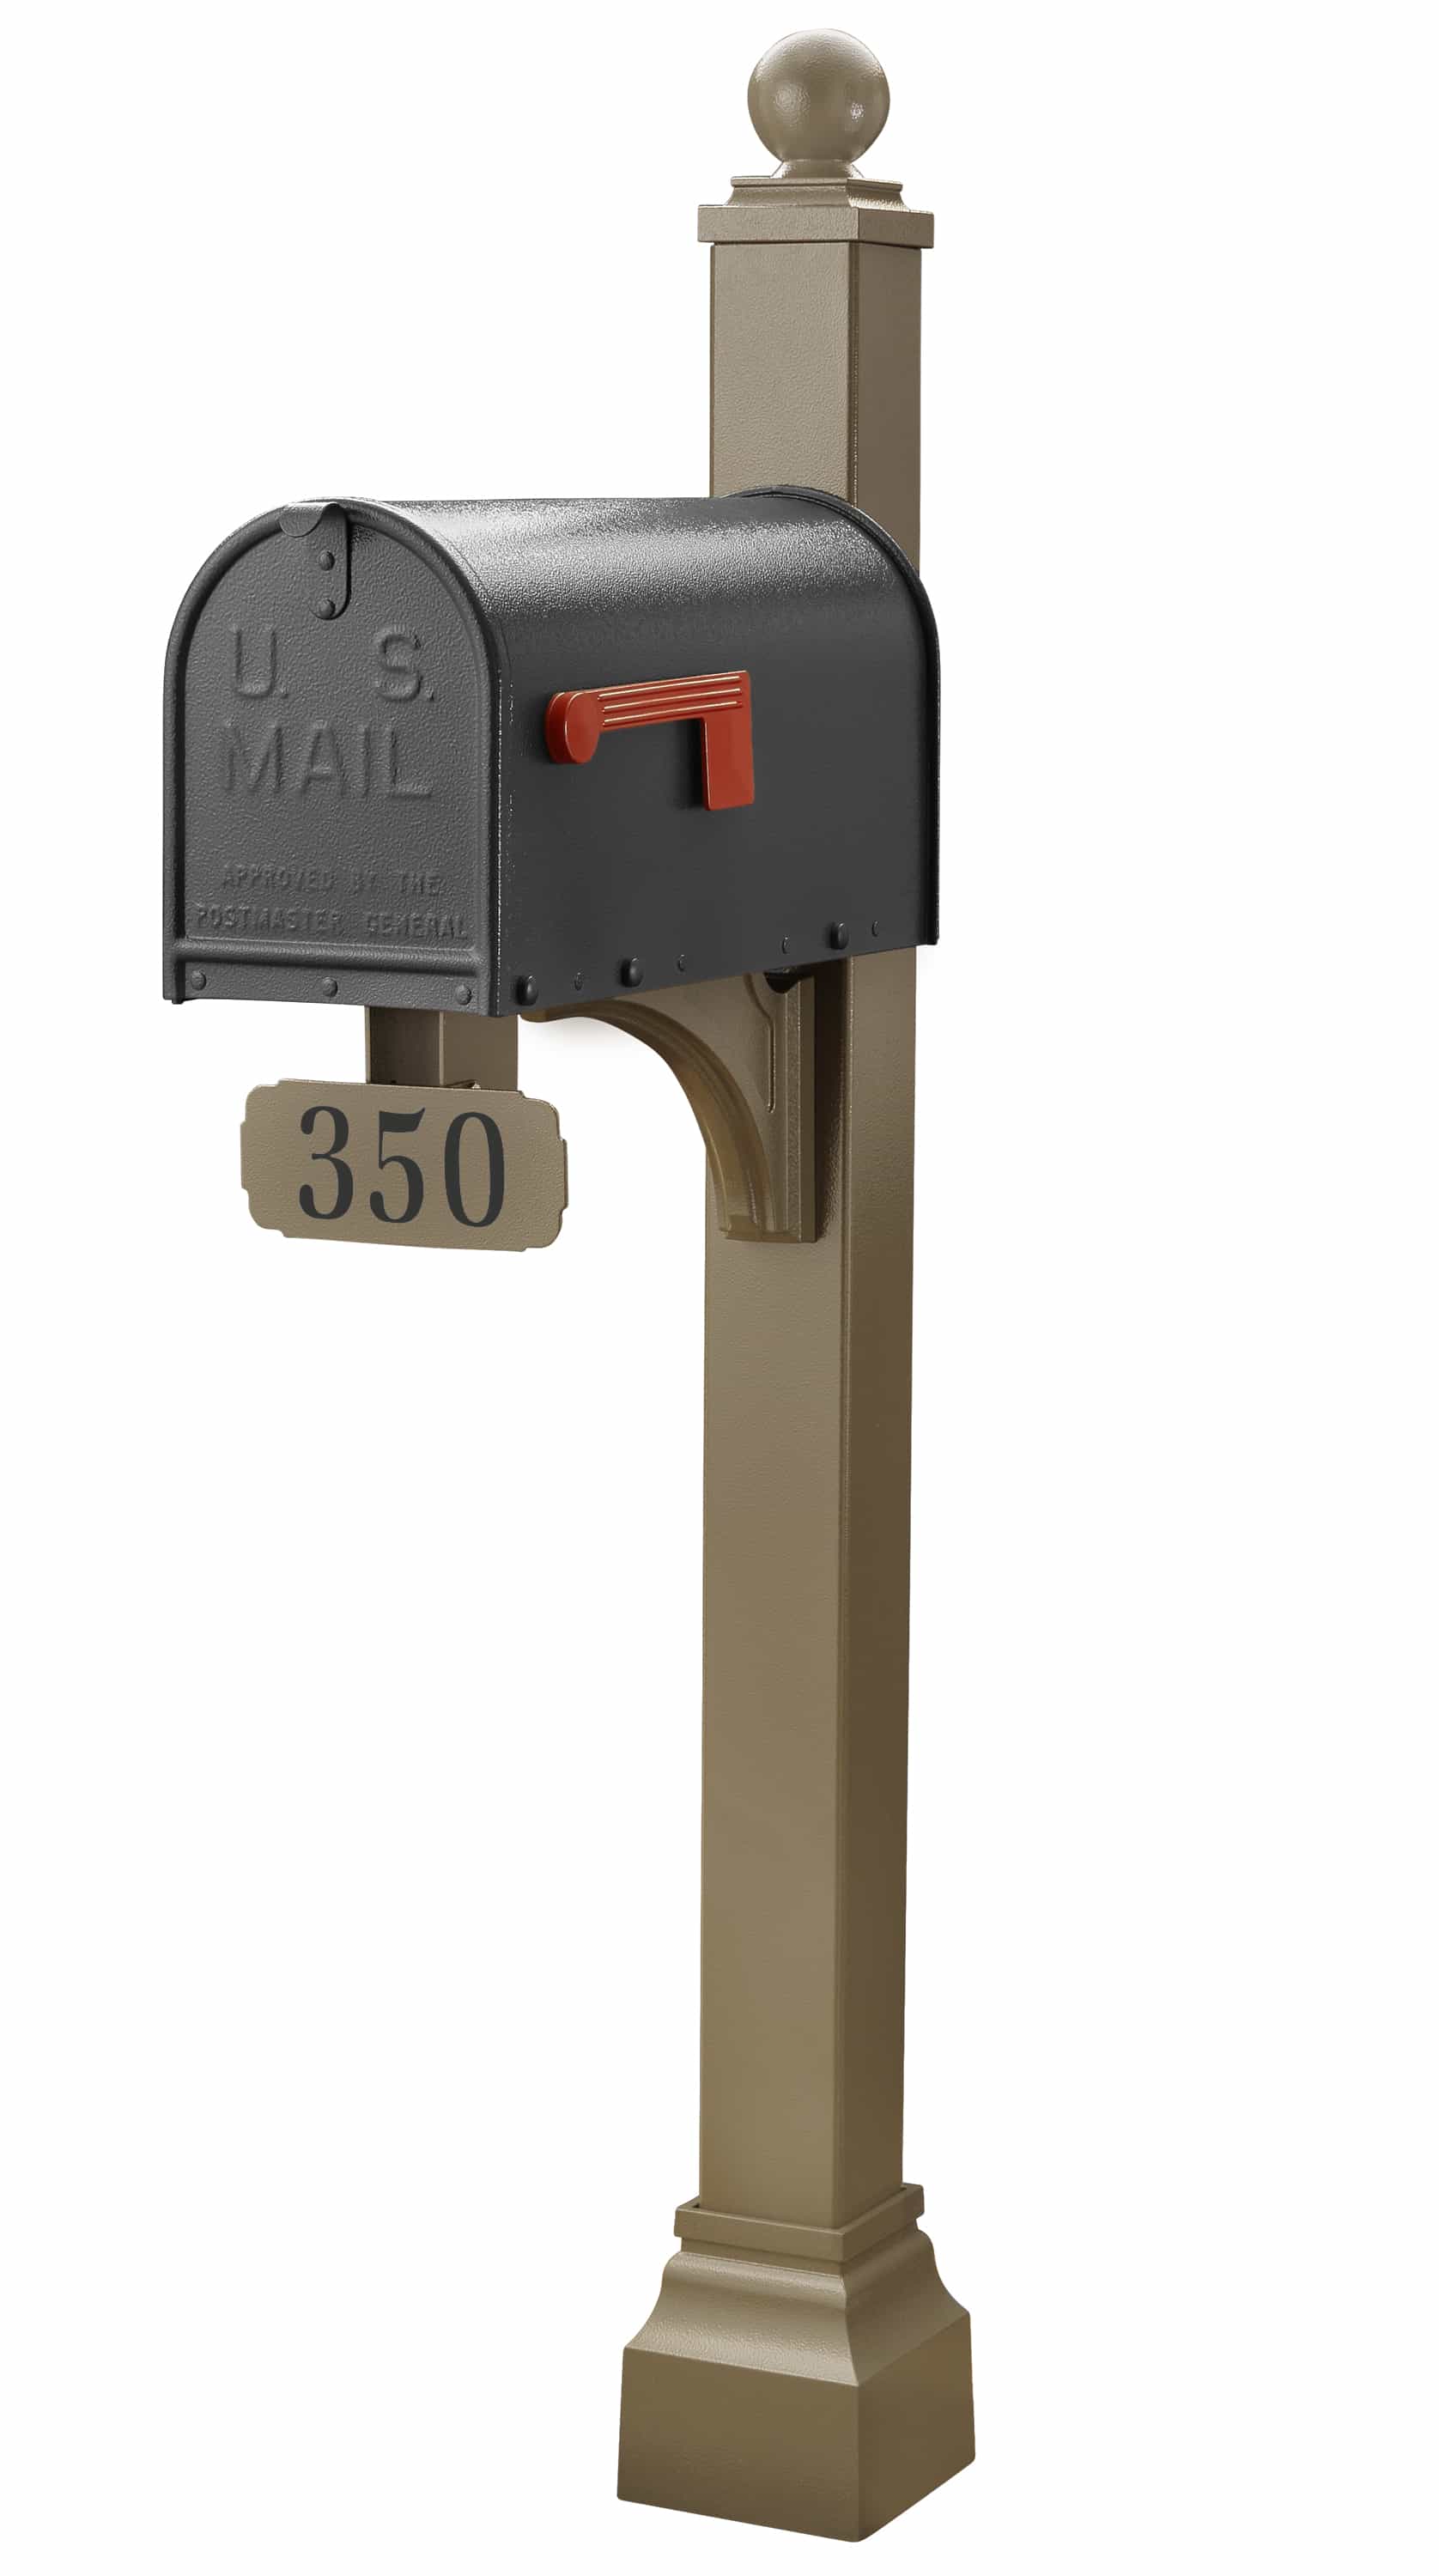 Janzer Mailbox with Decorative Post for Sale Product Image